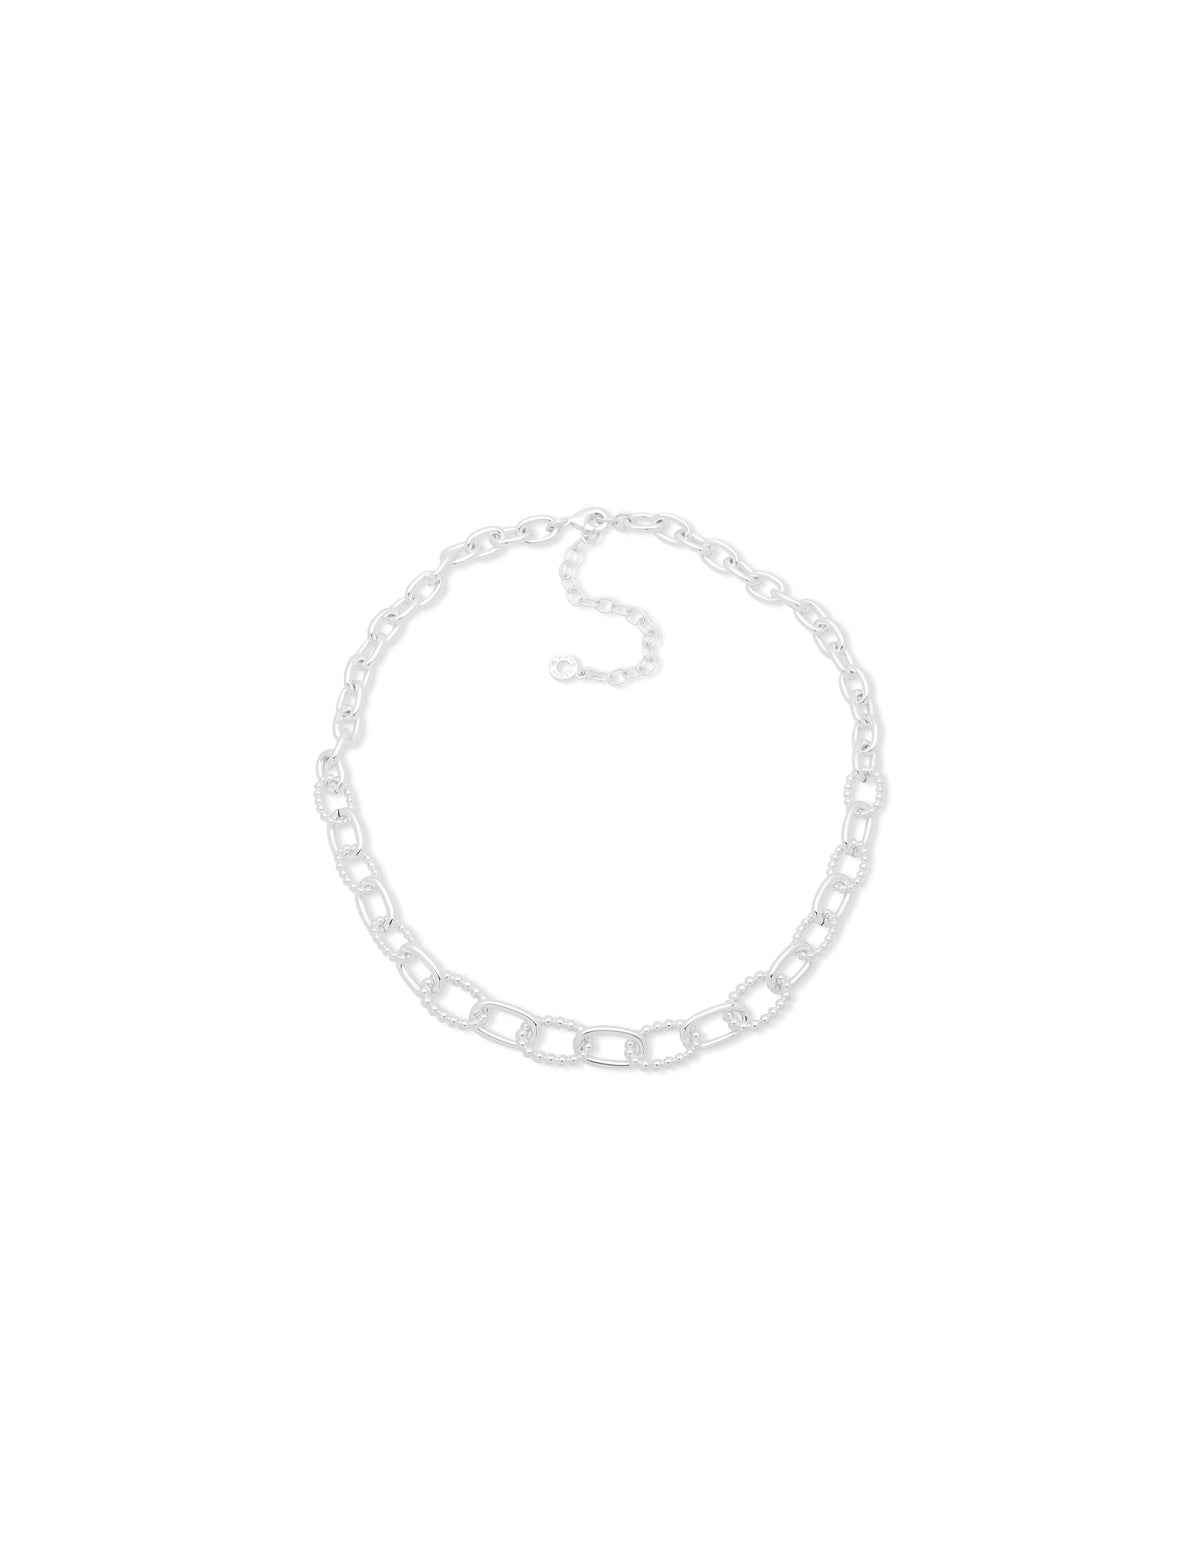 Silver-Tone Chain Link Necklace